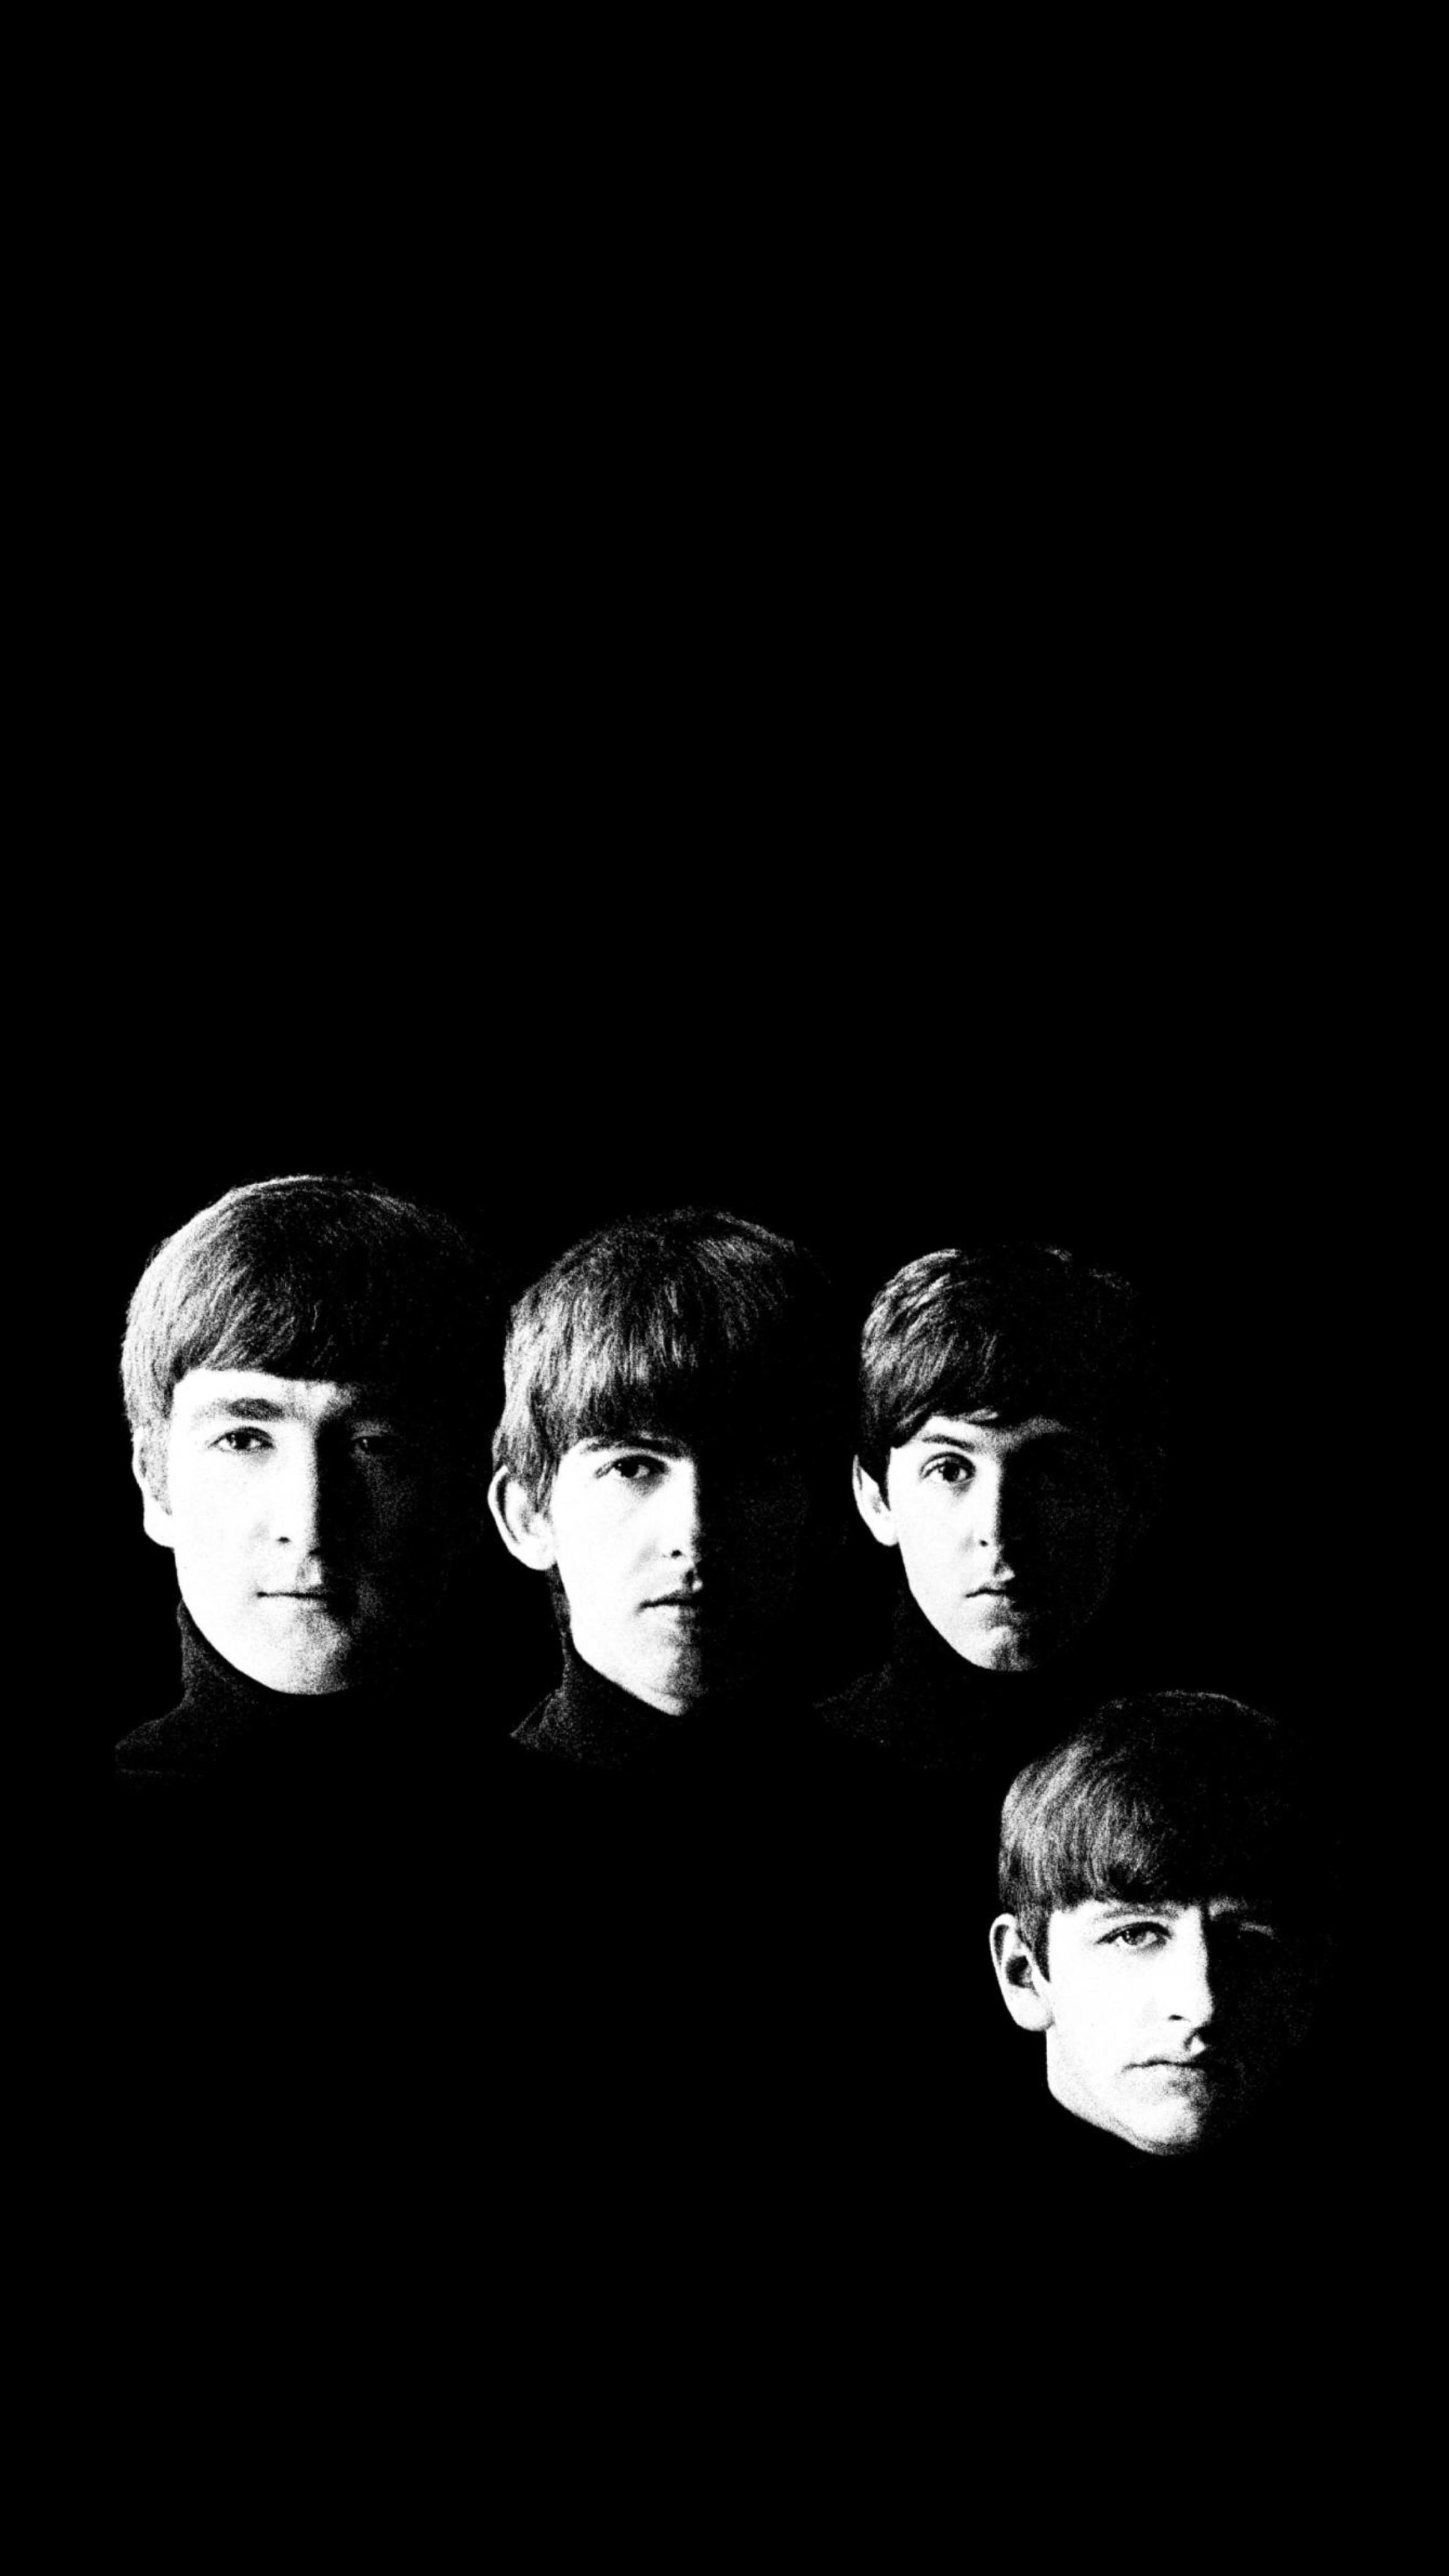 Day 2 of beatles wallpaper, today With The Beatles!